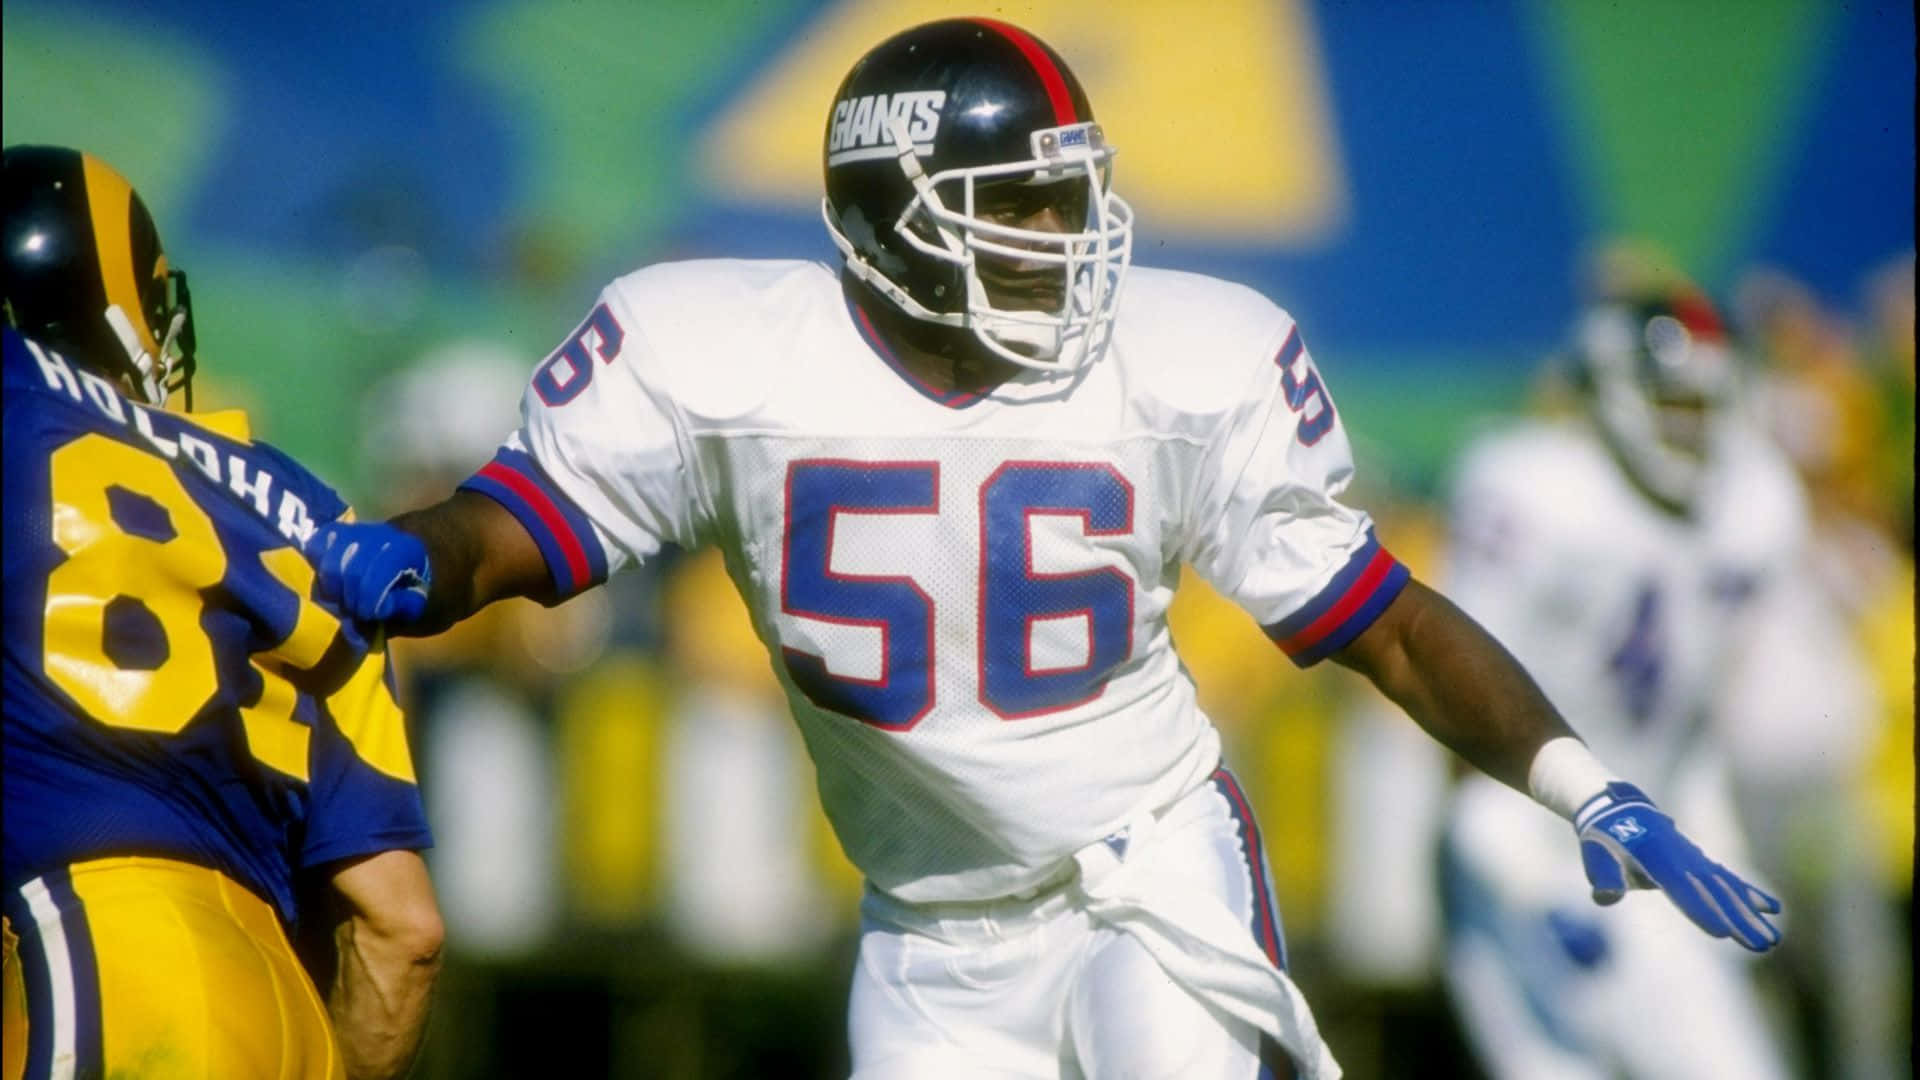 Download Lawrence Taylor Football Player Vintage Wallpaper